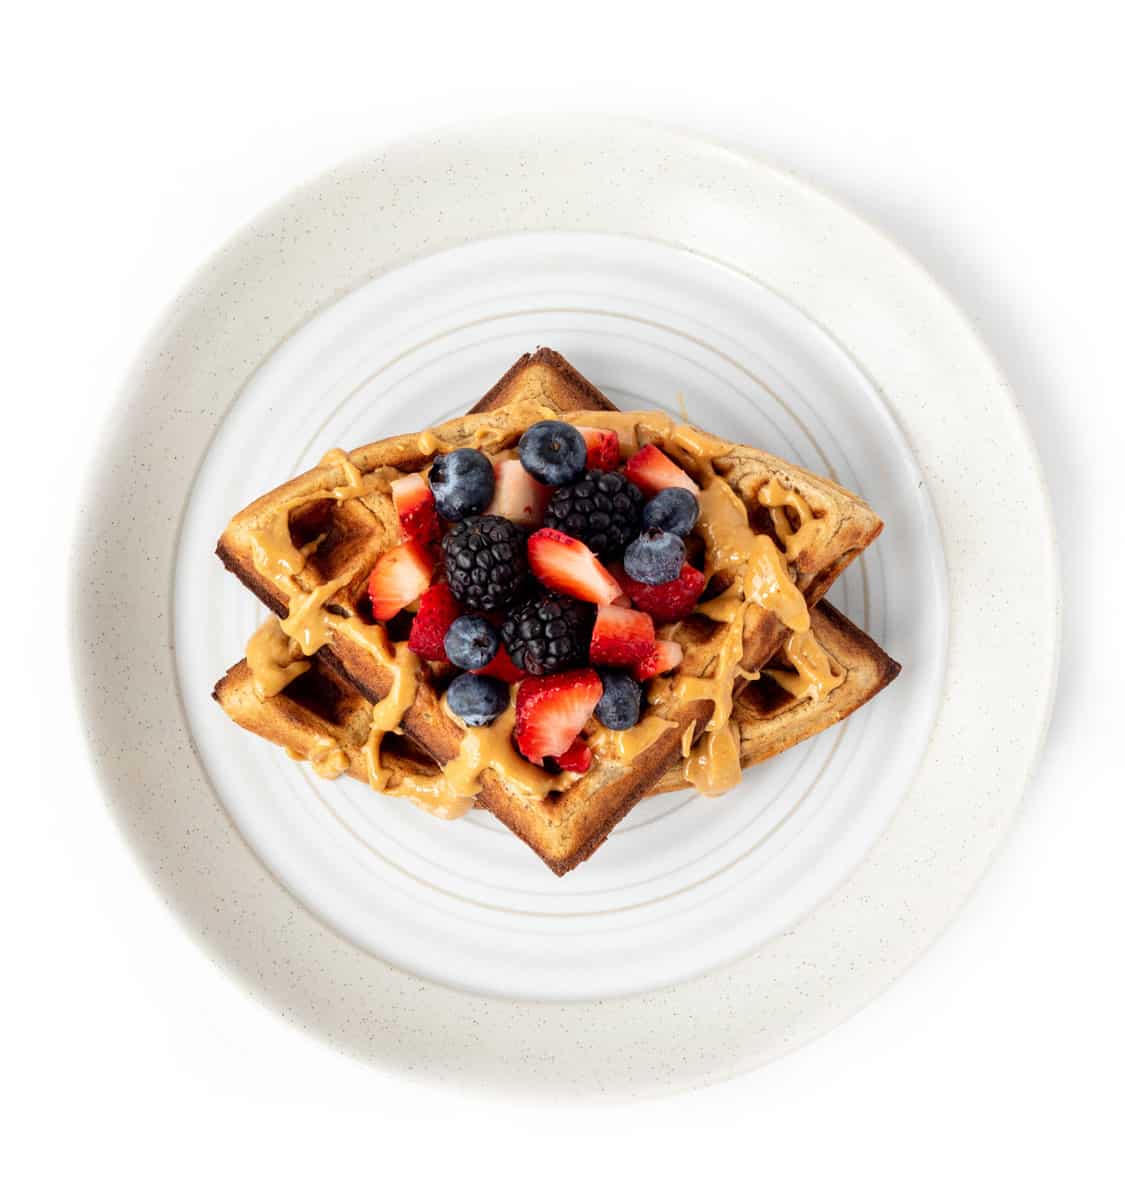 Two waffles on a plate with mixed berries and a drizzle of peanut butter on a plate